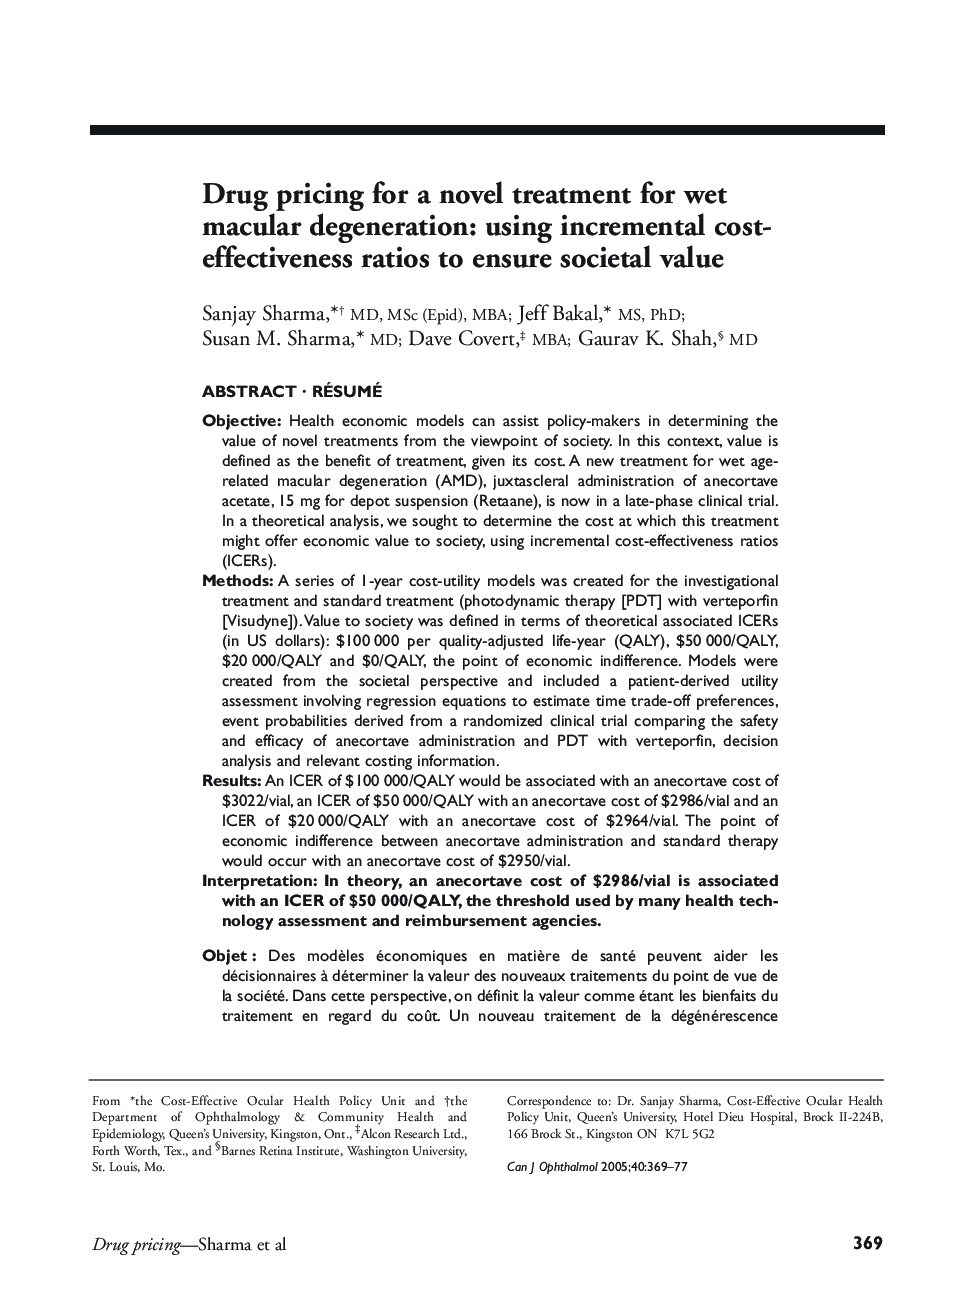 Drug pricing for a novel treatment for wet macular degeneration: using incremental cost-effectiveness ratios to ensure societal value